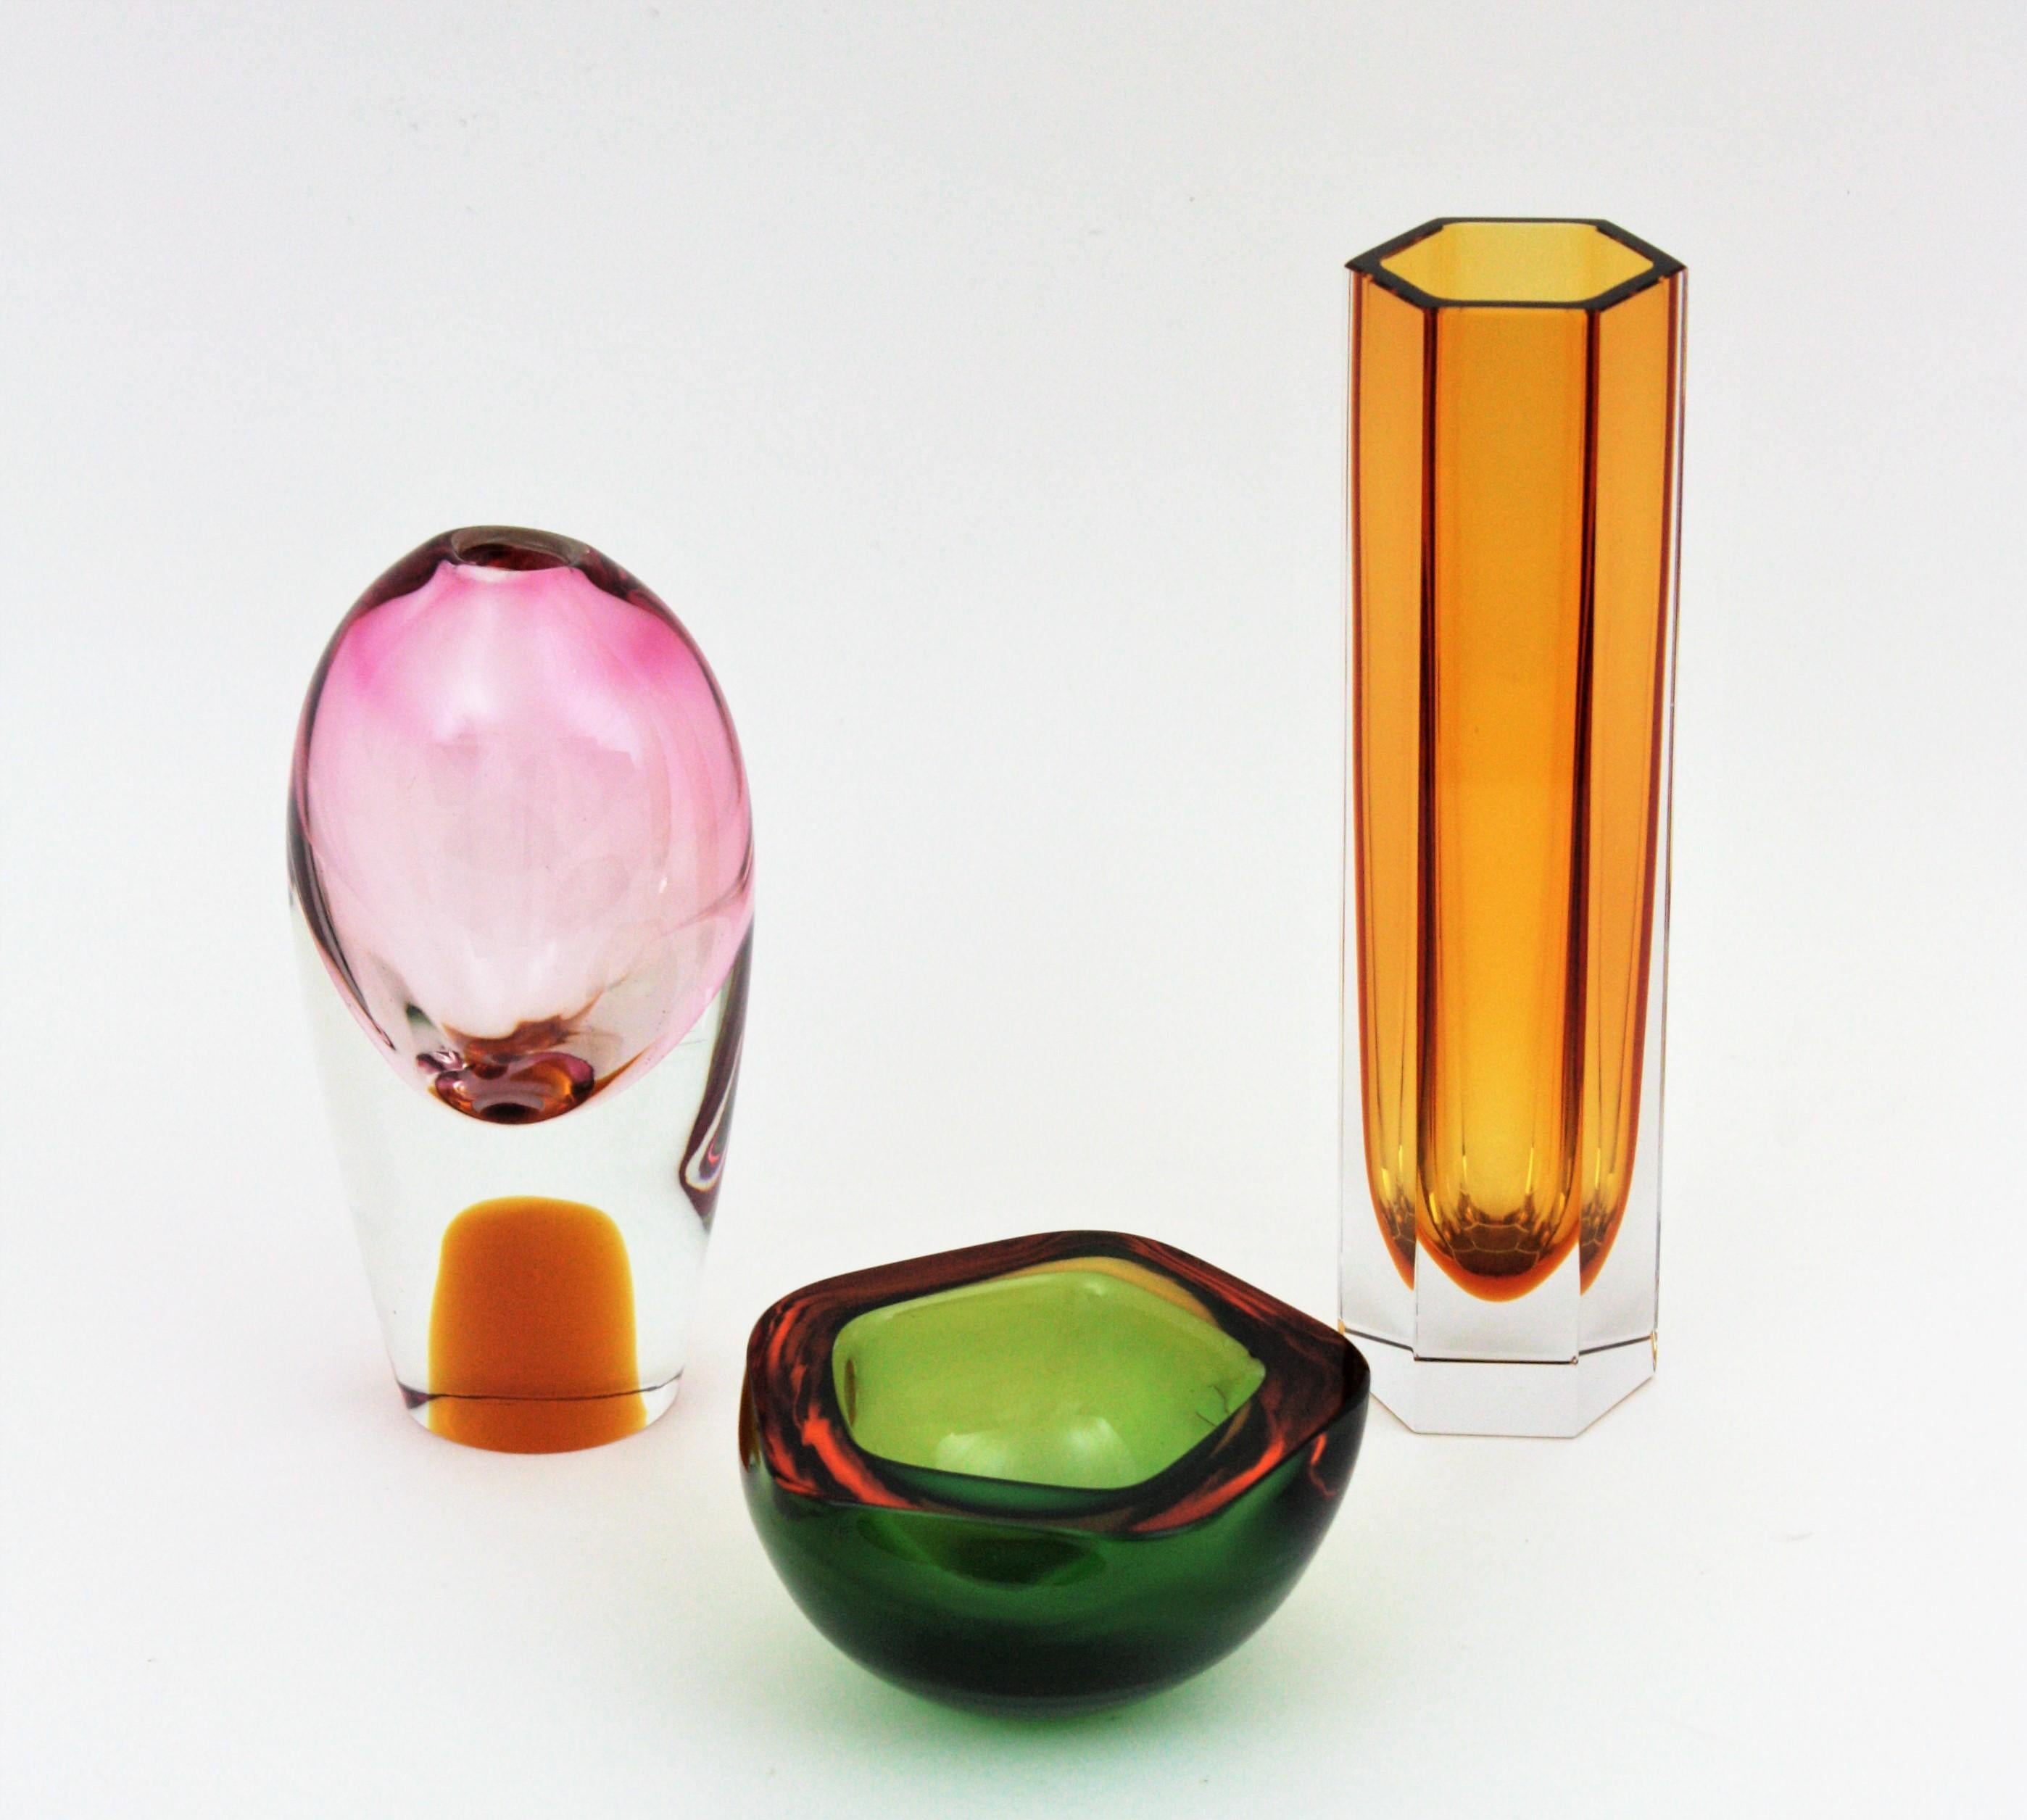 Amazing ovoid shaped hand blown Murano glass sommerso vase by Flavio Poli for Seguso Vetri d'Arte, Italy, 1950s.
This heavy sommerso block vase is made in pink and amber glass summerged into clear glass.
Lovely to be used as decorative vase,